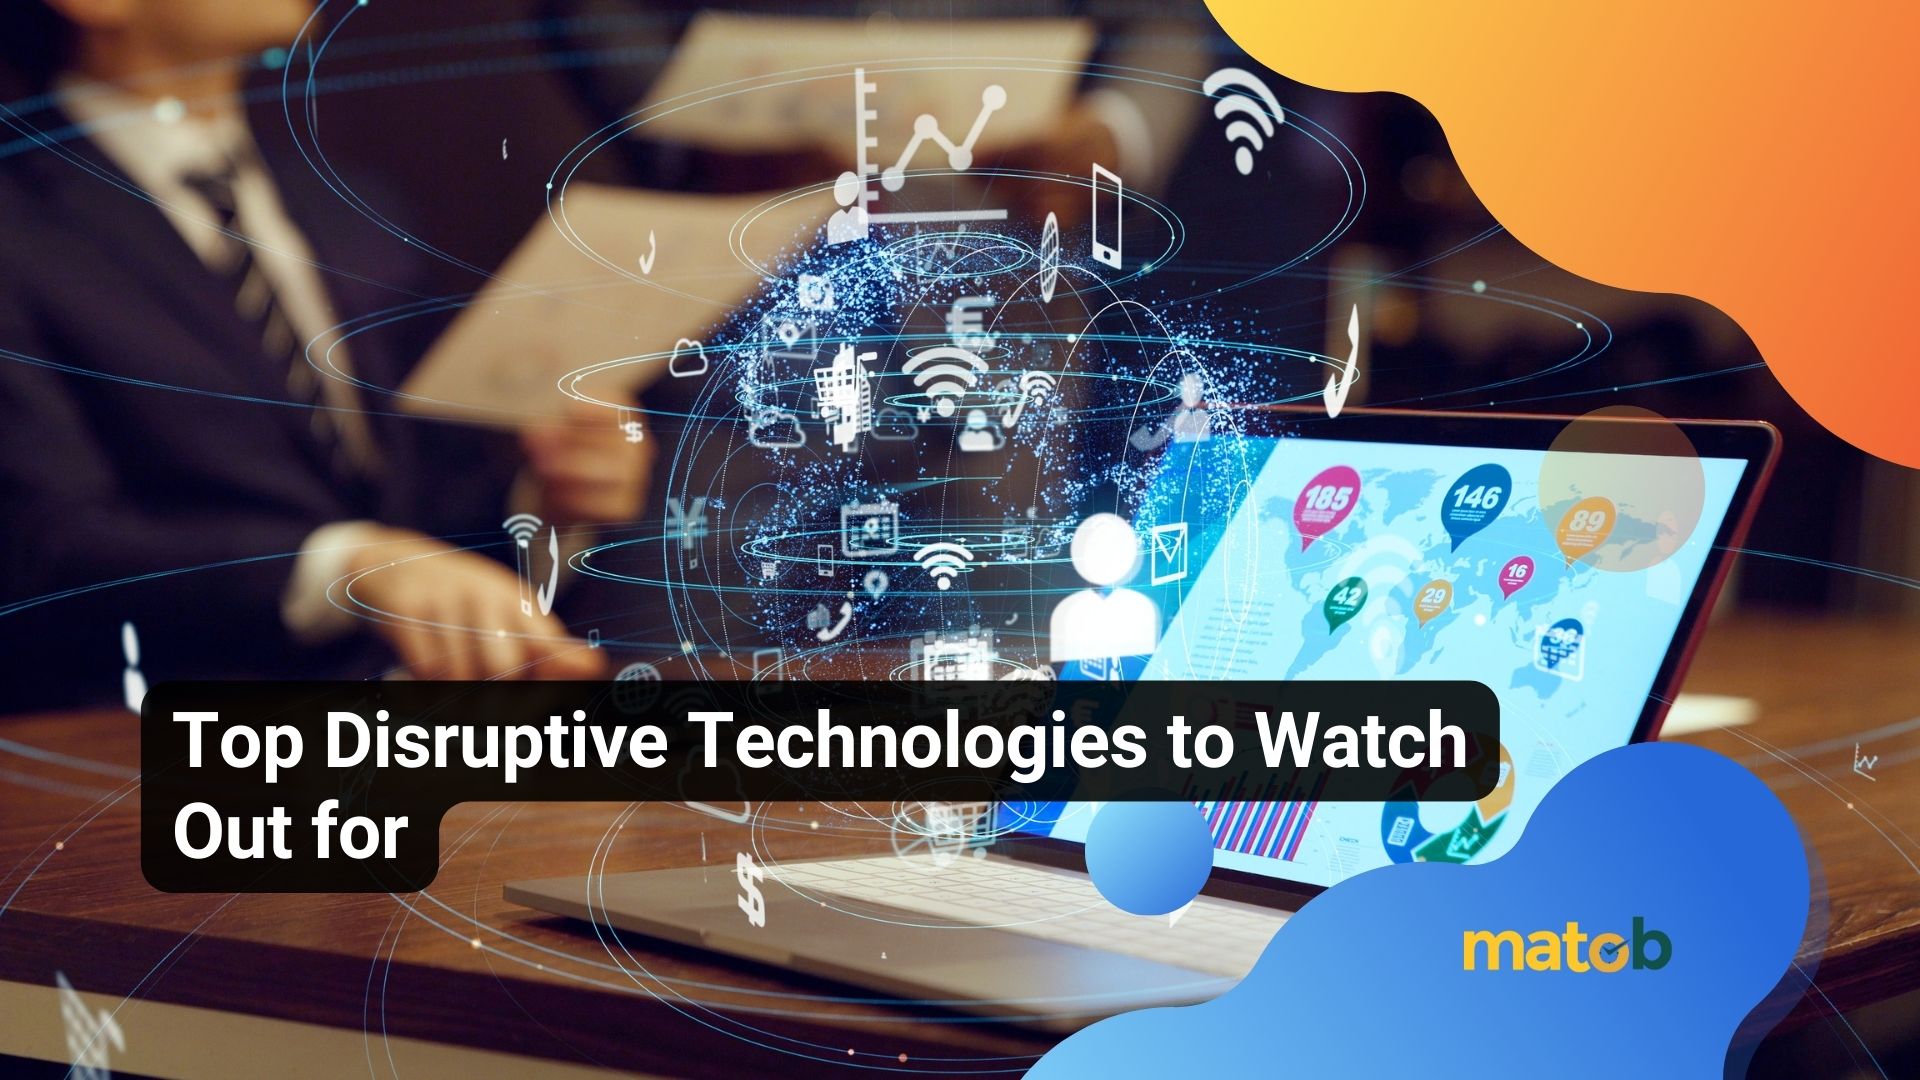 Top Disruptive Technologies to Watch Out for